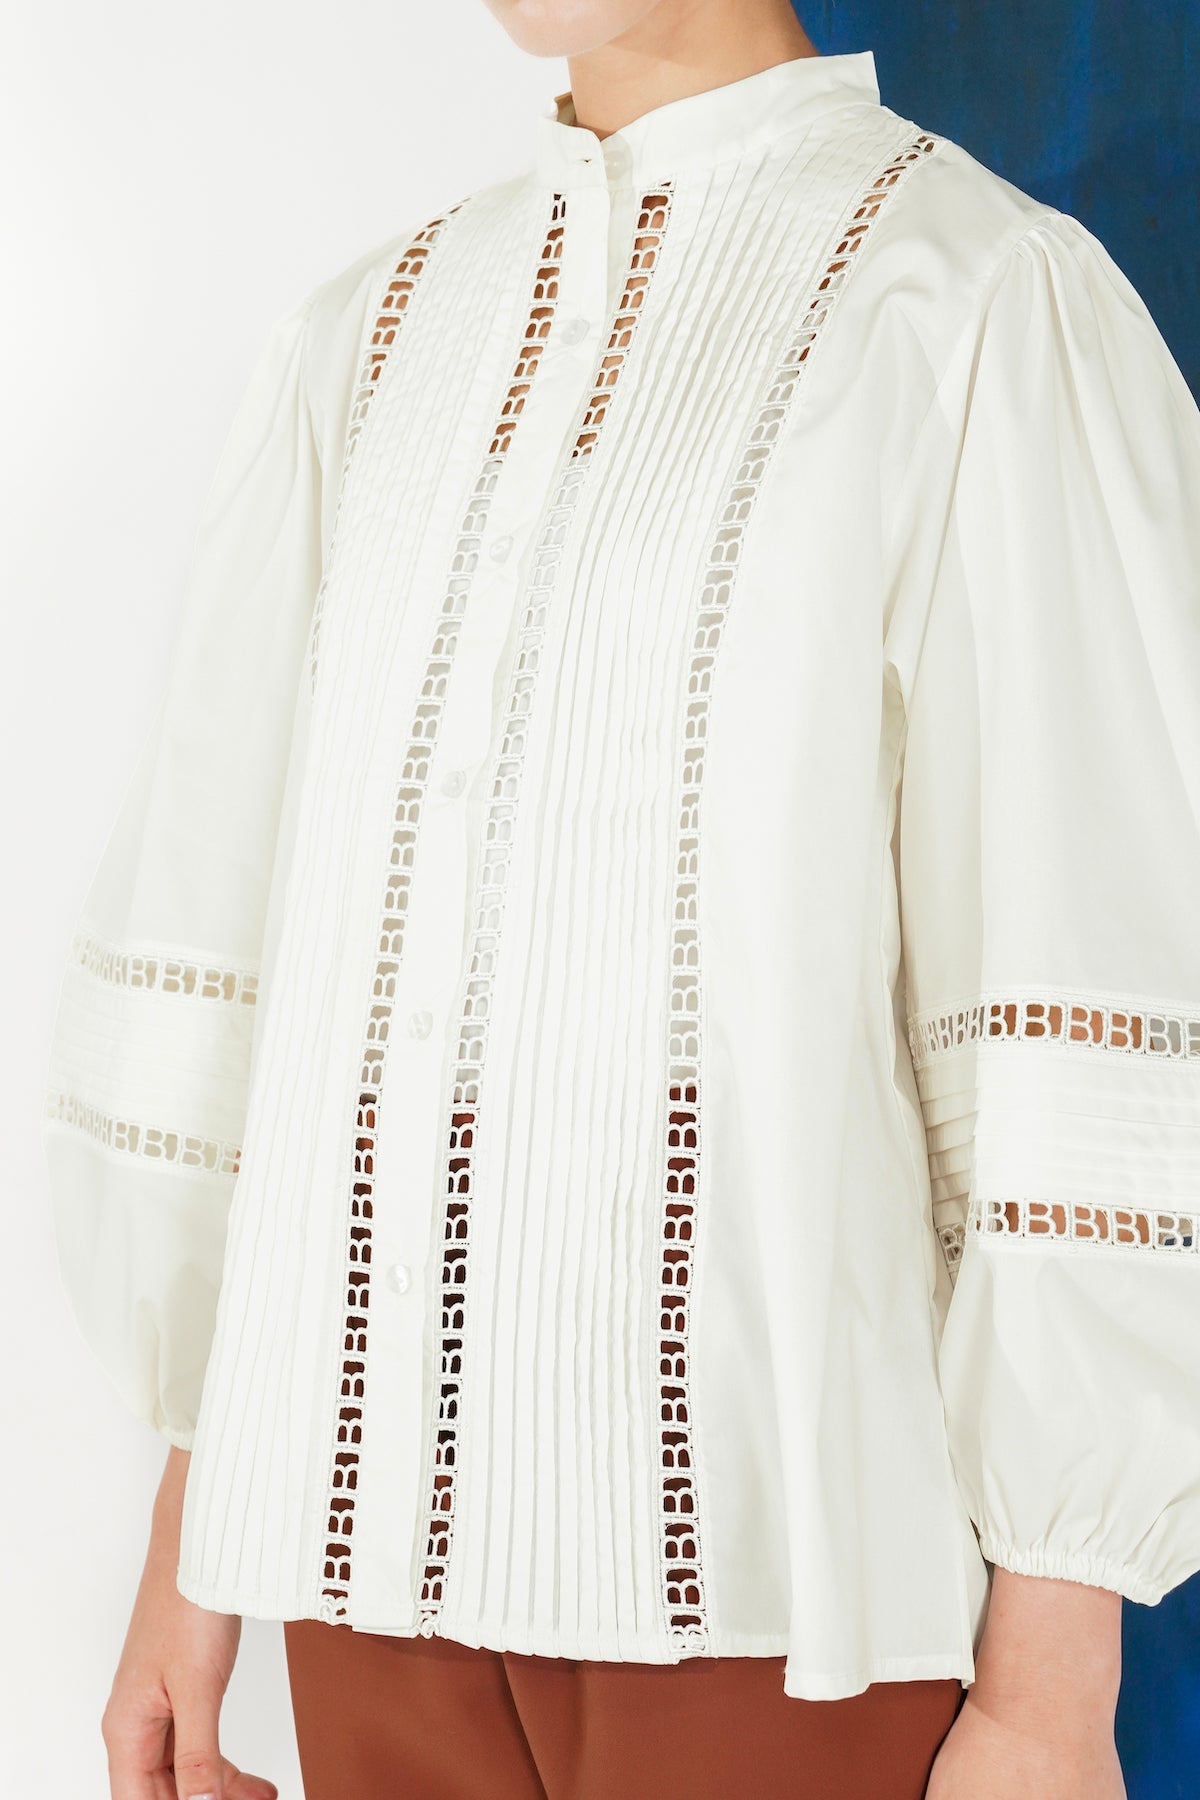 Avenly Lace Shirt - Broken White